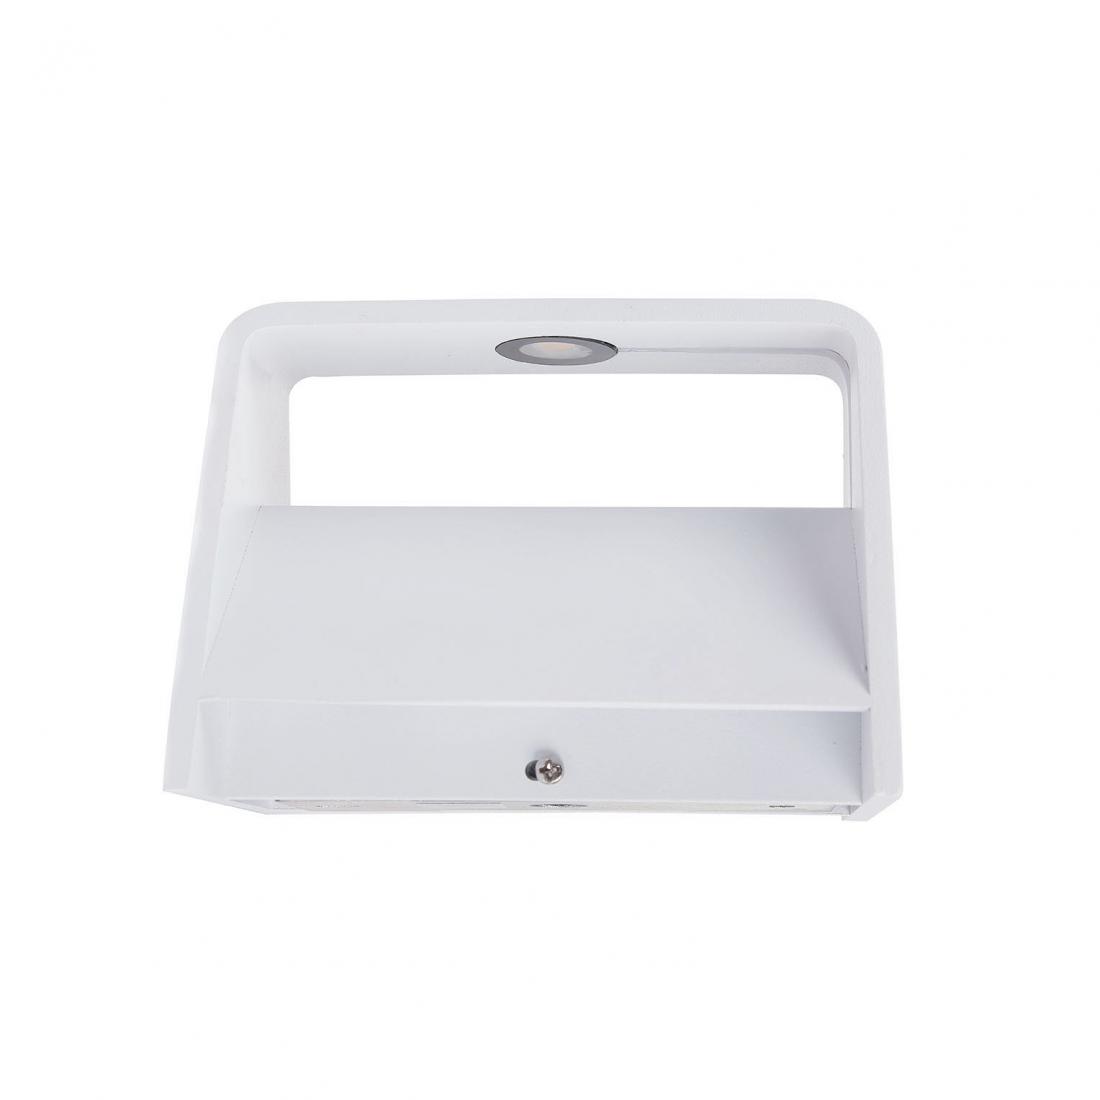 3W indoor white wall mounted wall lights 